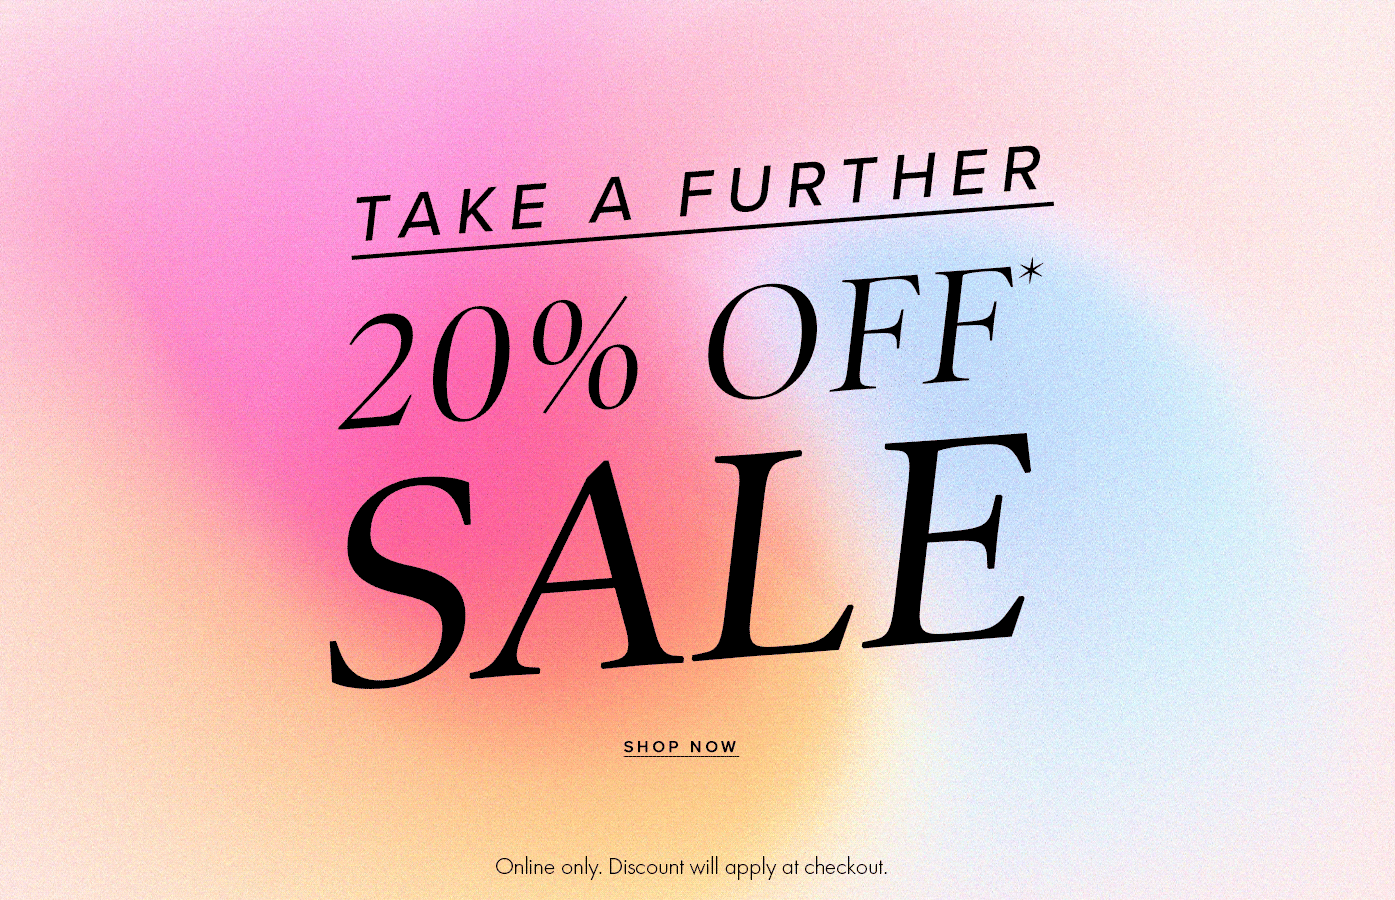 Take a Further 20% off sale styles at Ally Fashion